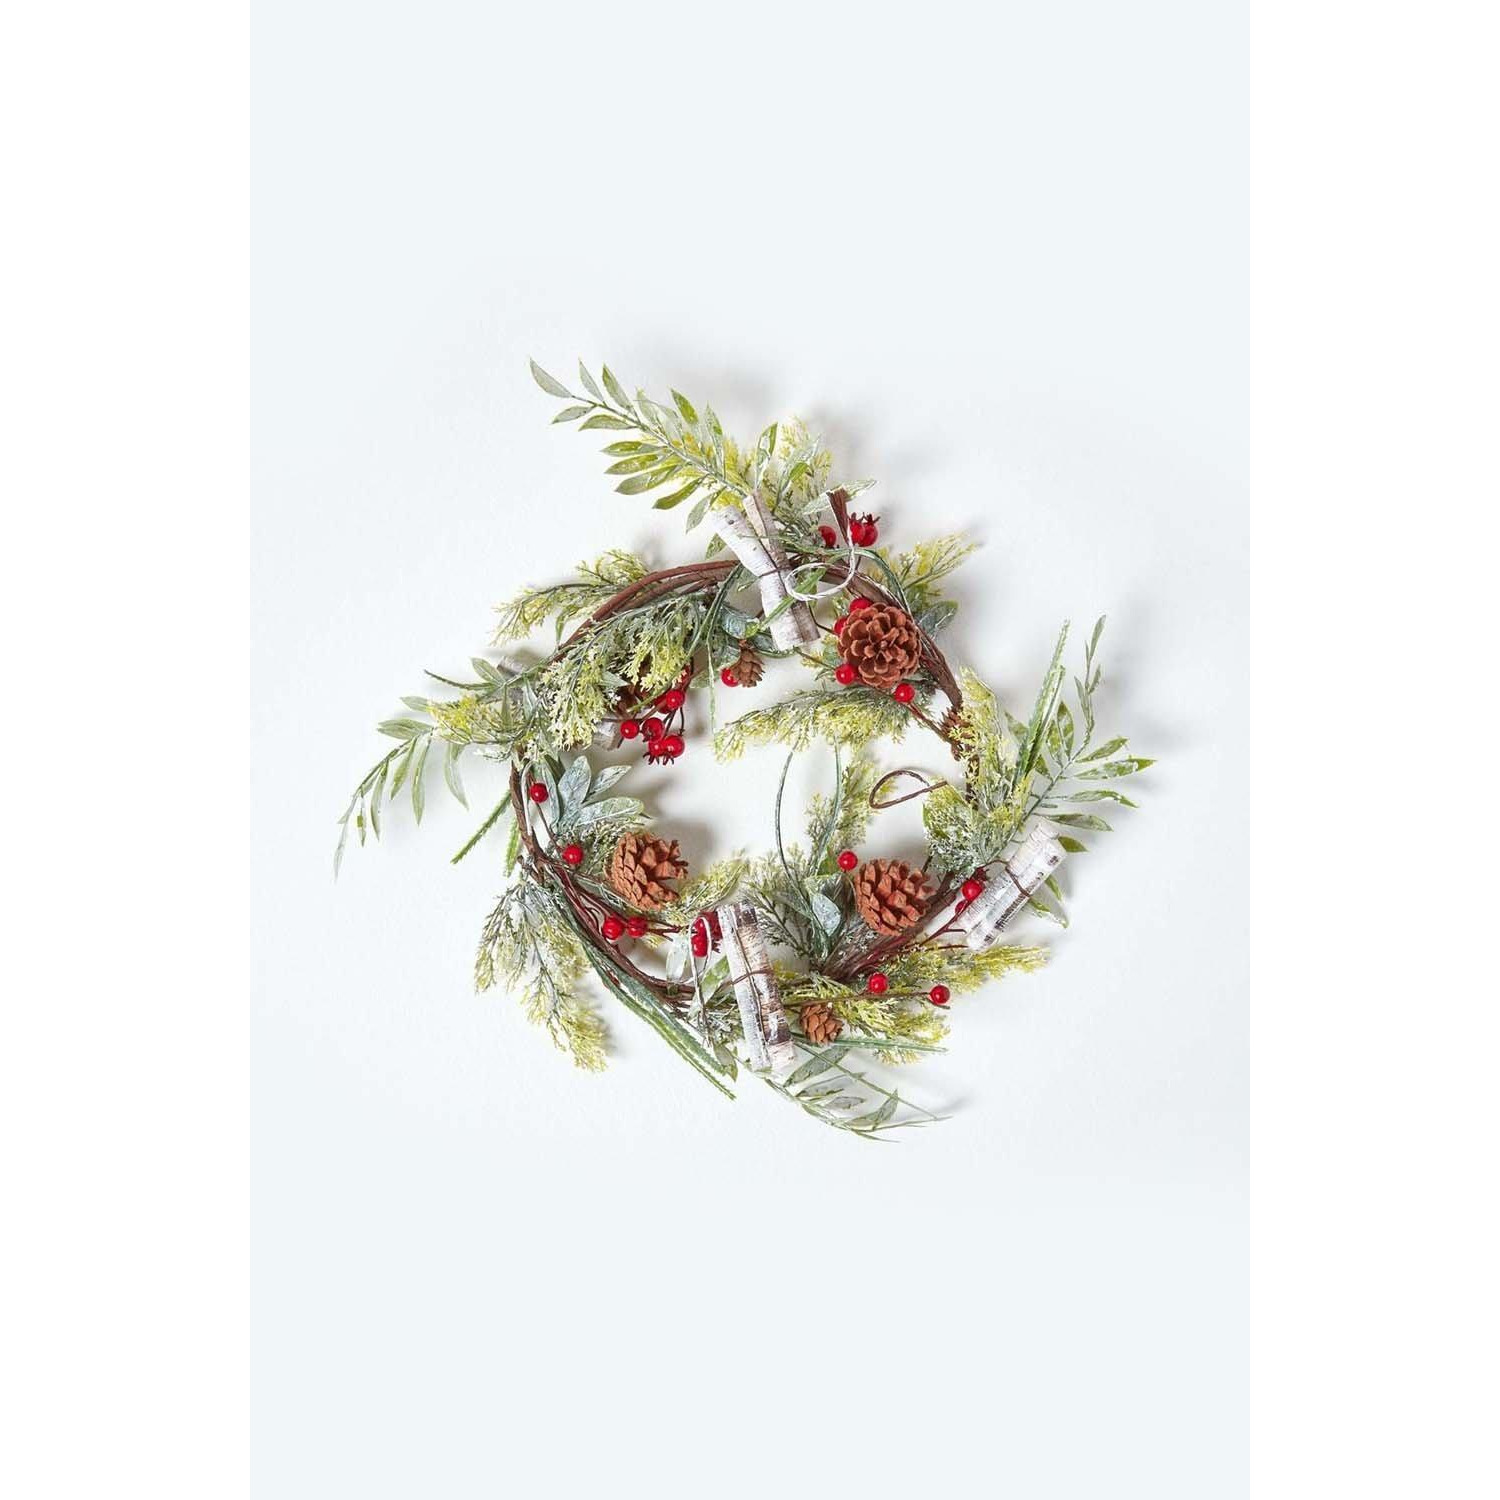 Artificial Wreath with Berries and Pinecones, 18 Inches - image 1